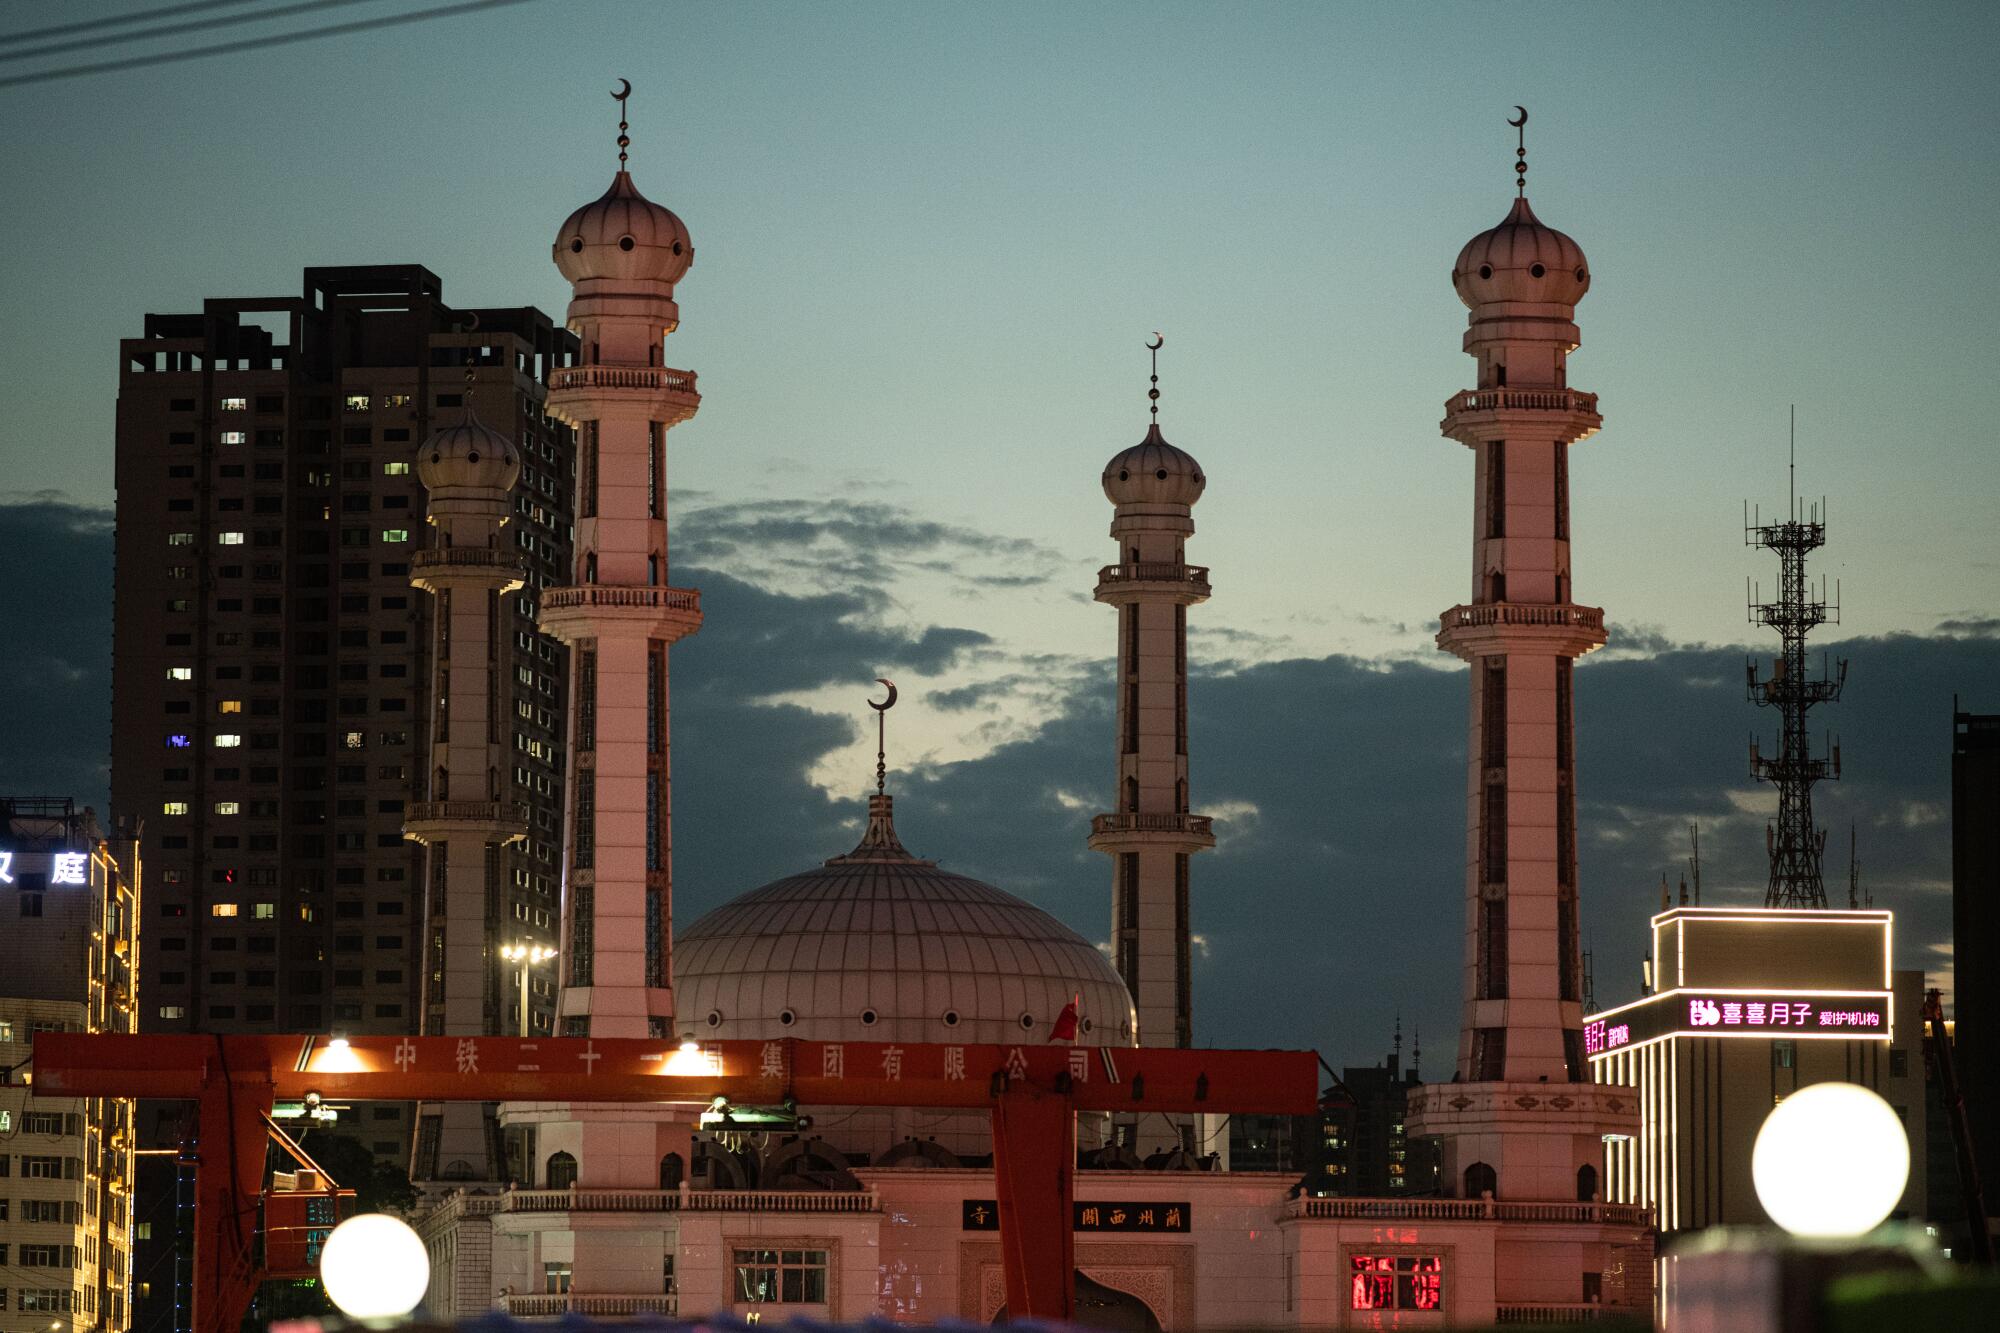 A building with a dome in the center and four minarets on the corners sits next to tall buildings against an evening sky 